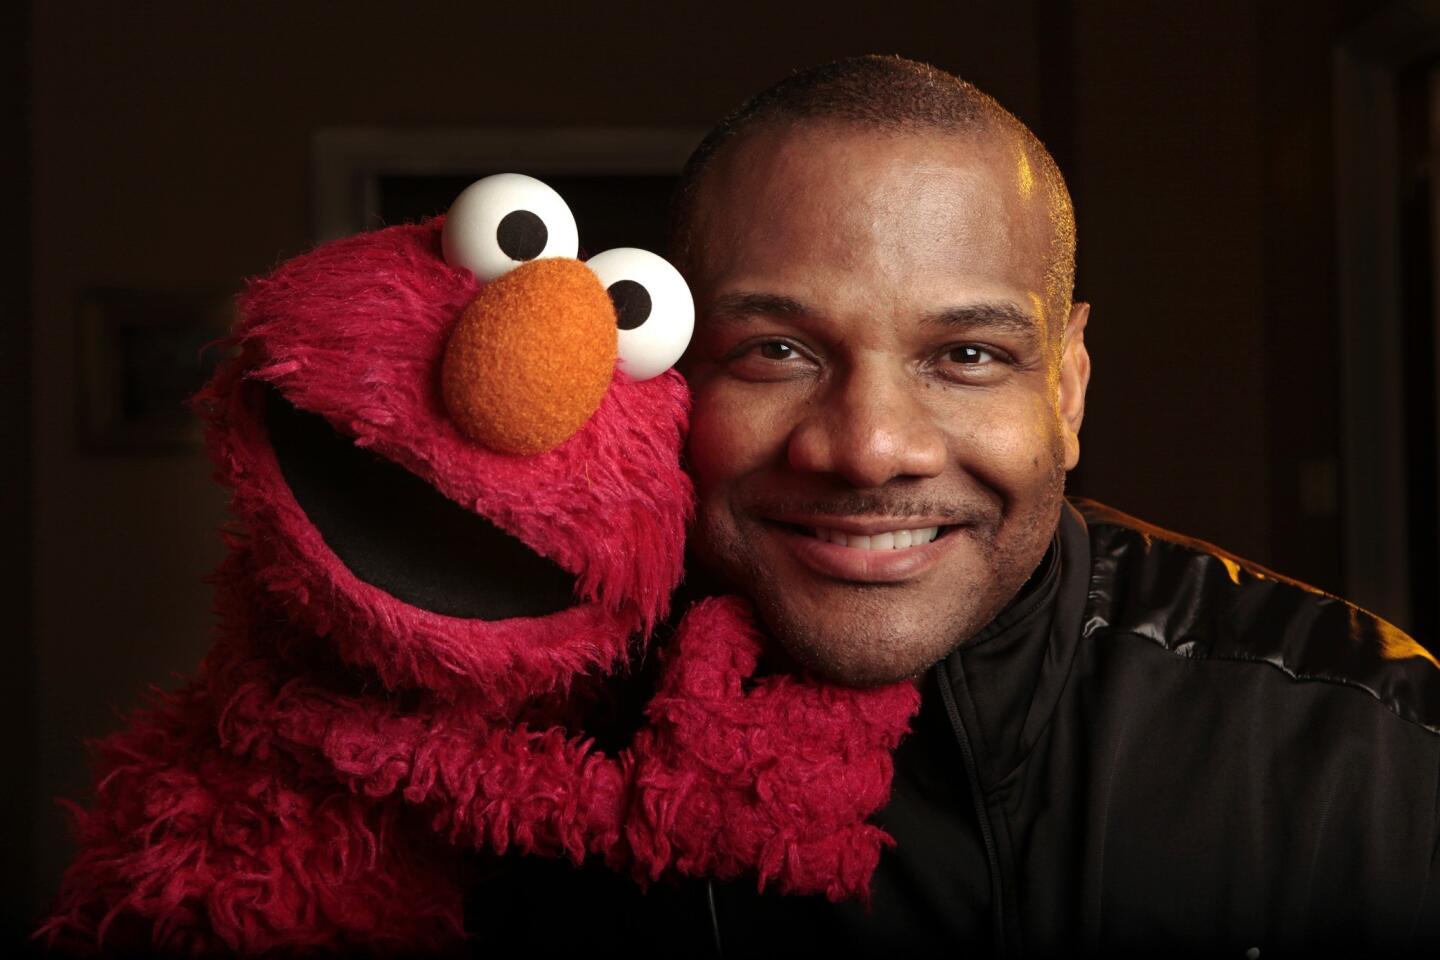 Former Elmo puppeteer Kevin Clash is three lawsuits lighter